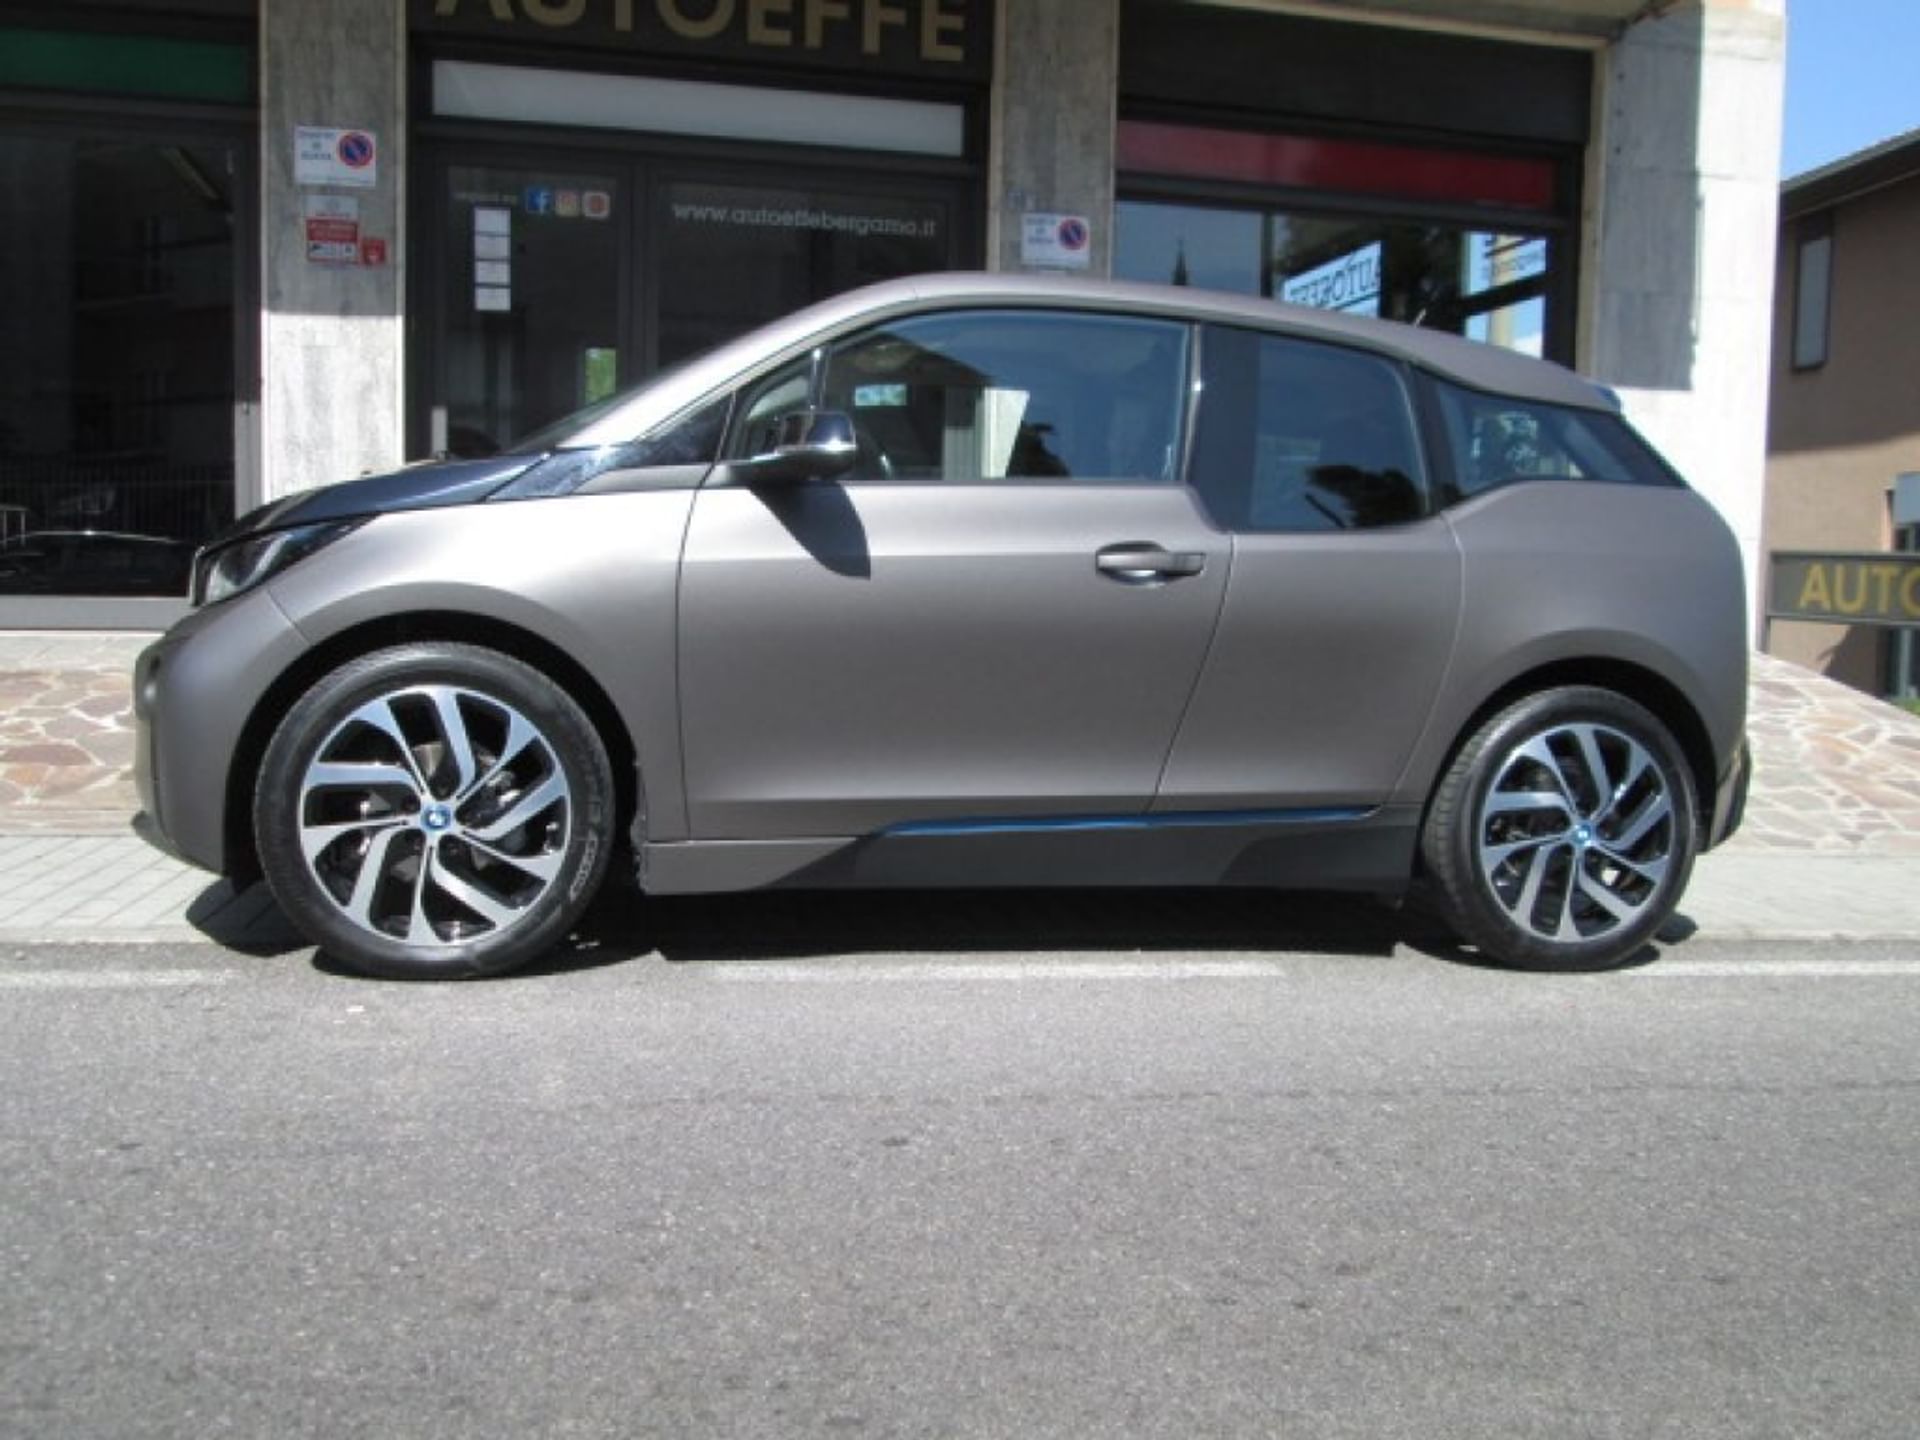 BMW i3 - Laterale sinistro